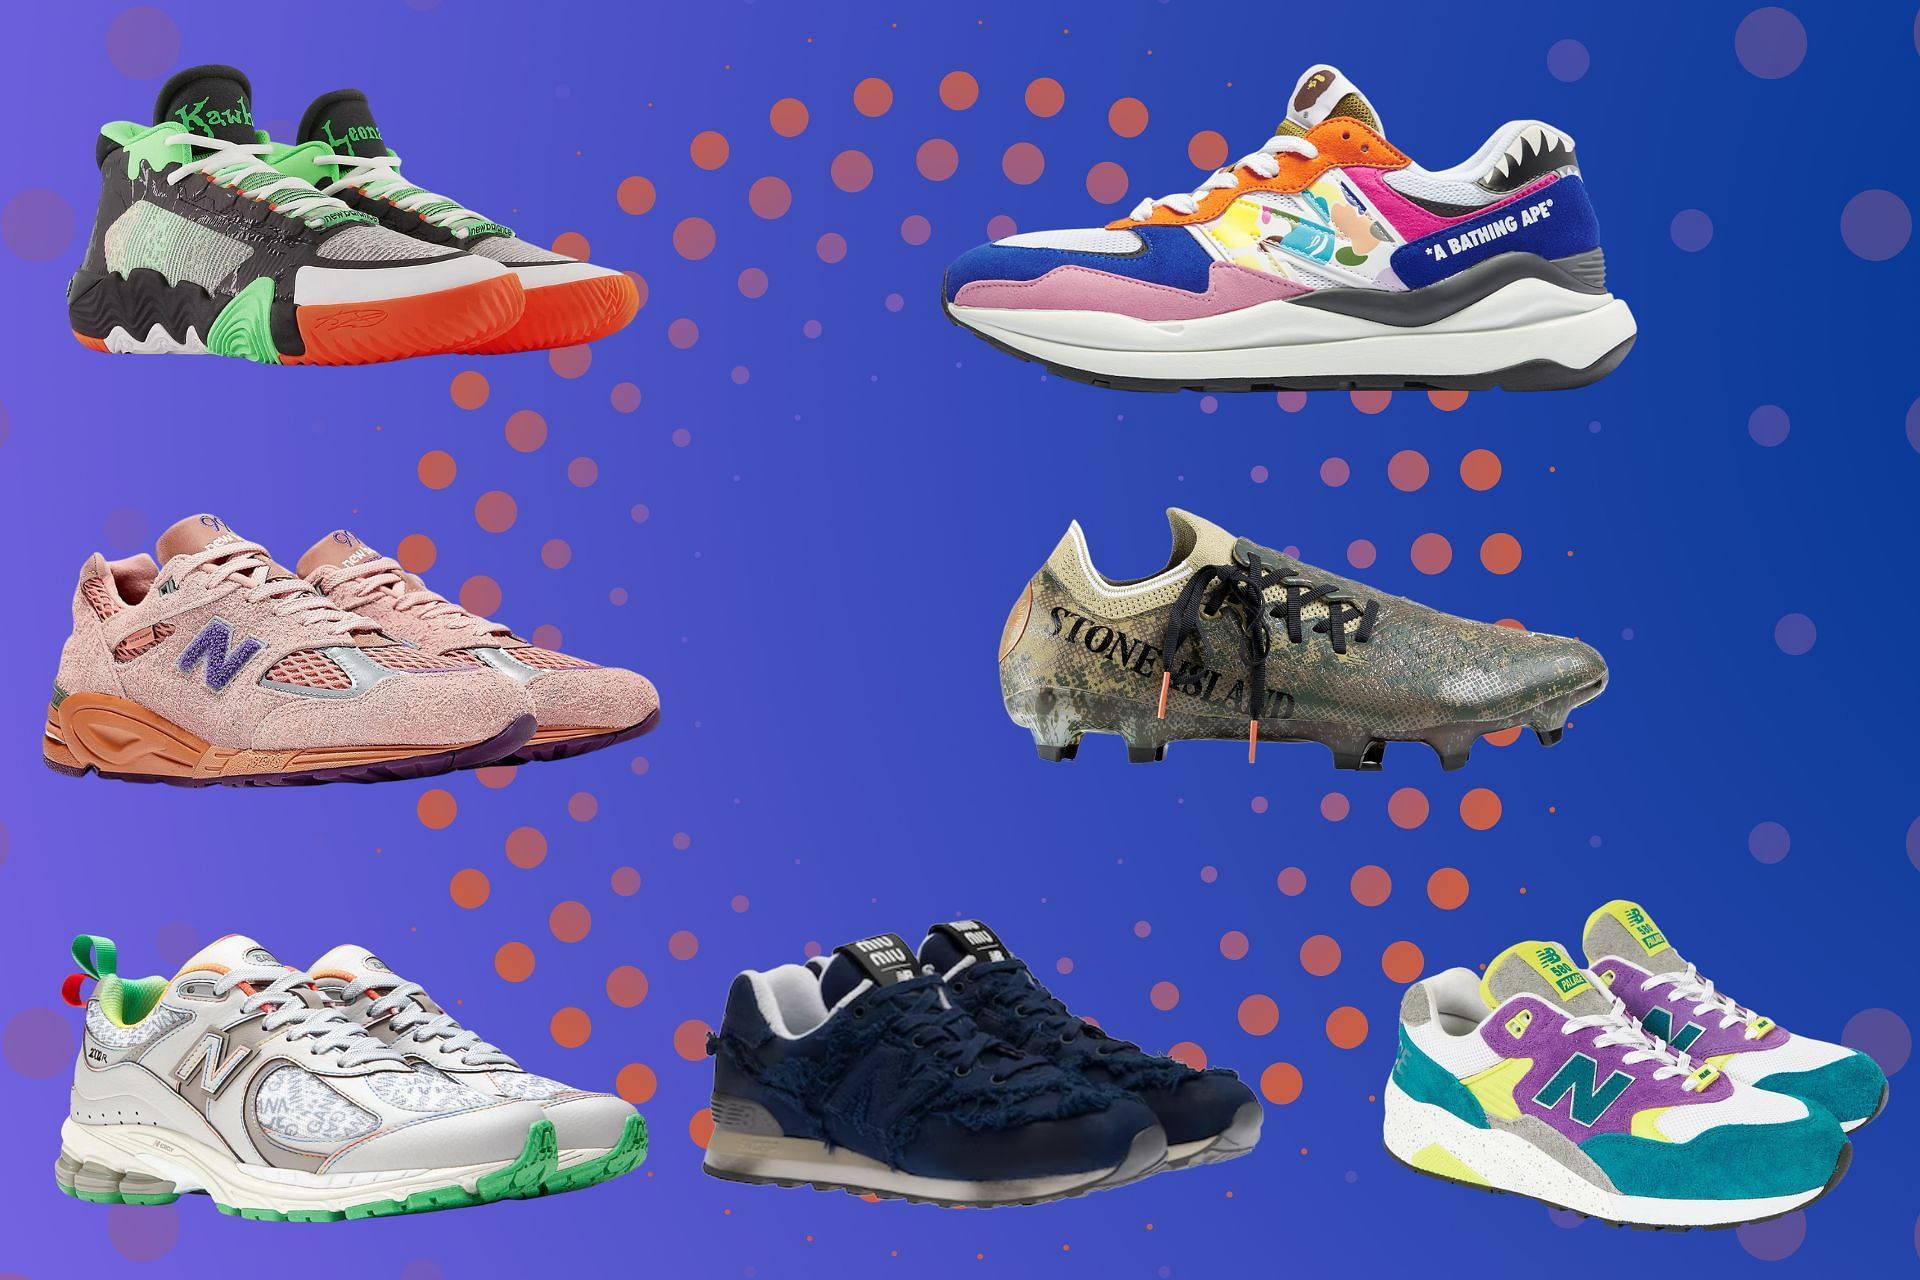 7 best New Balance sneaker collabs launched in 2022